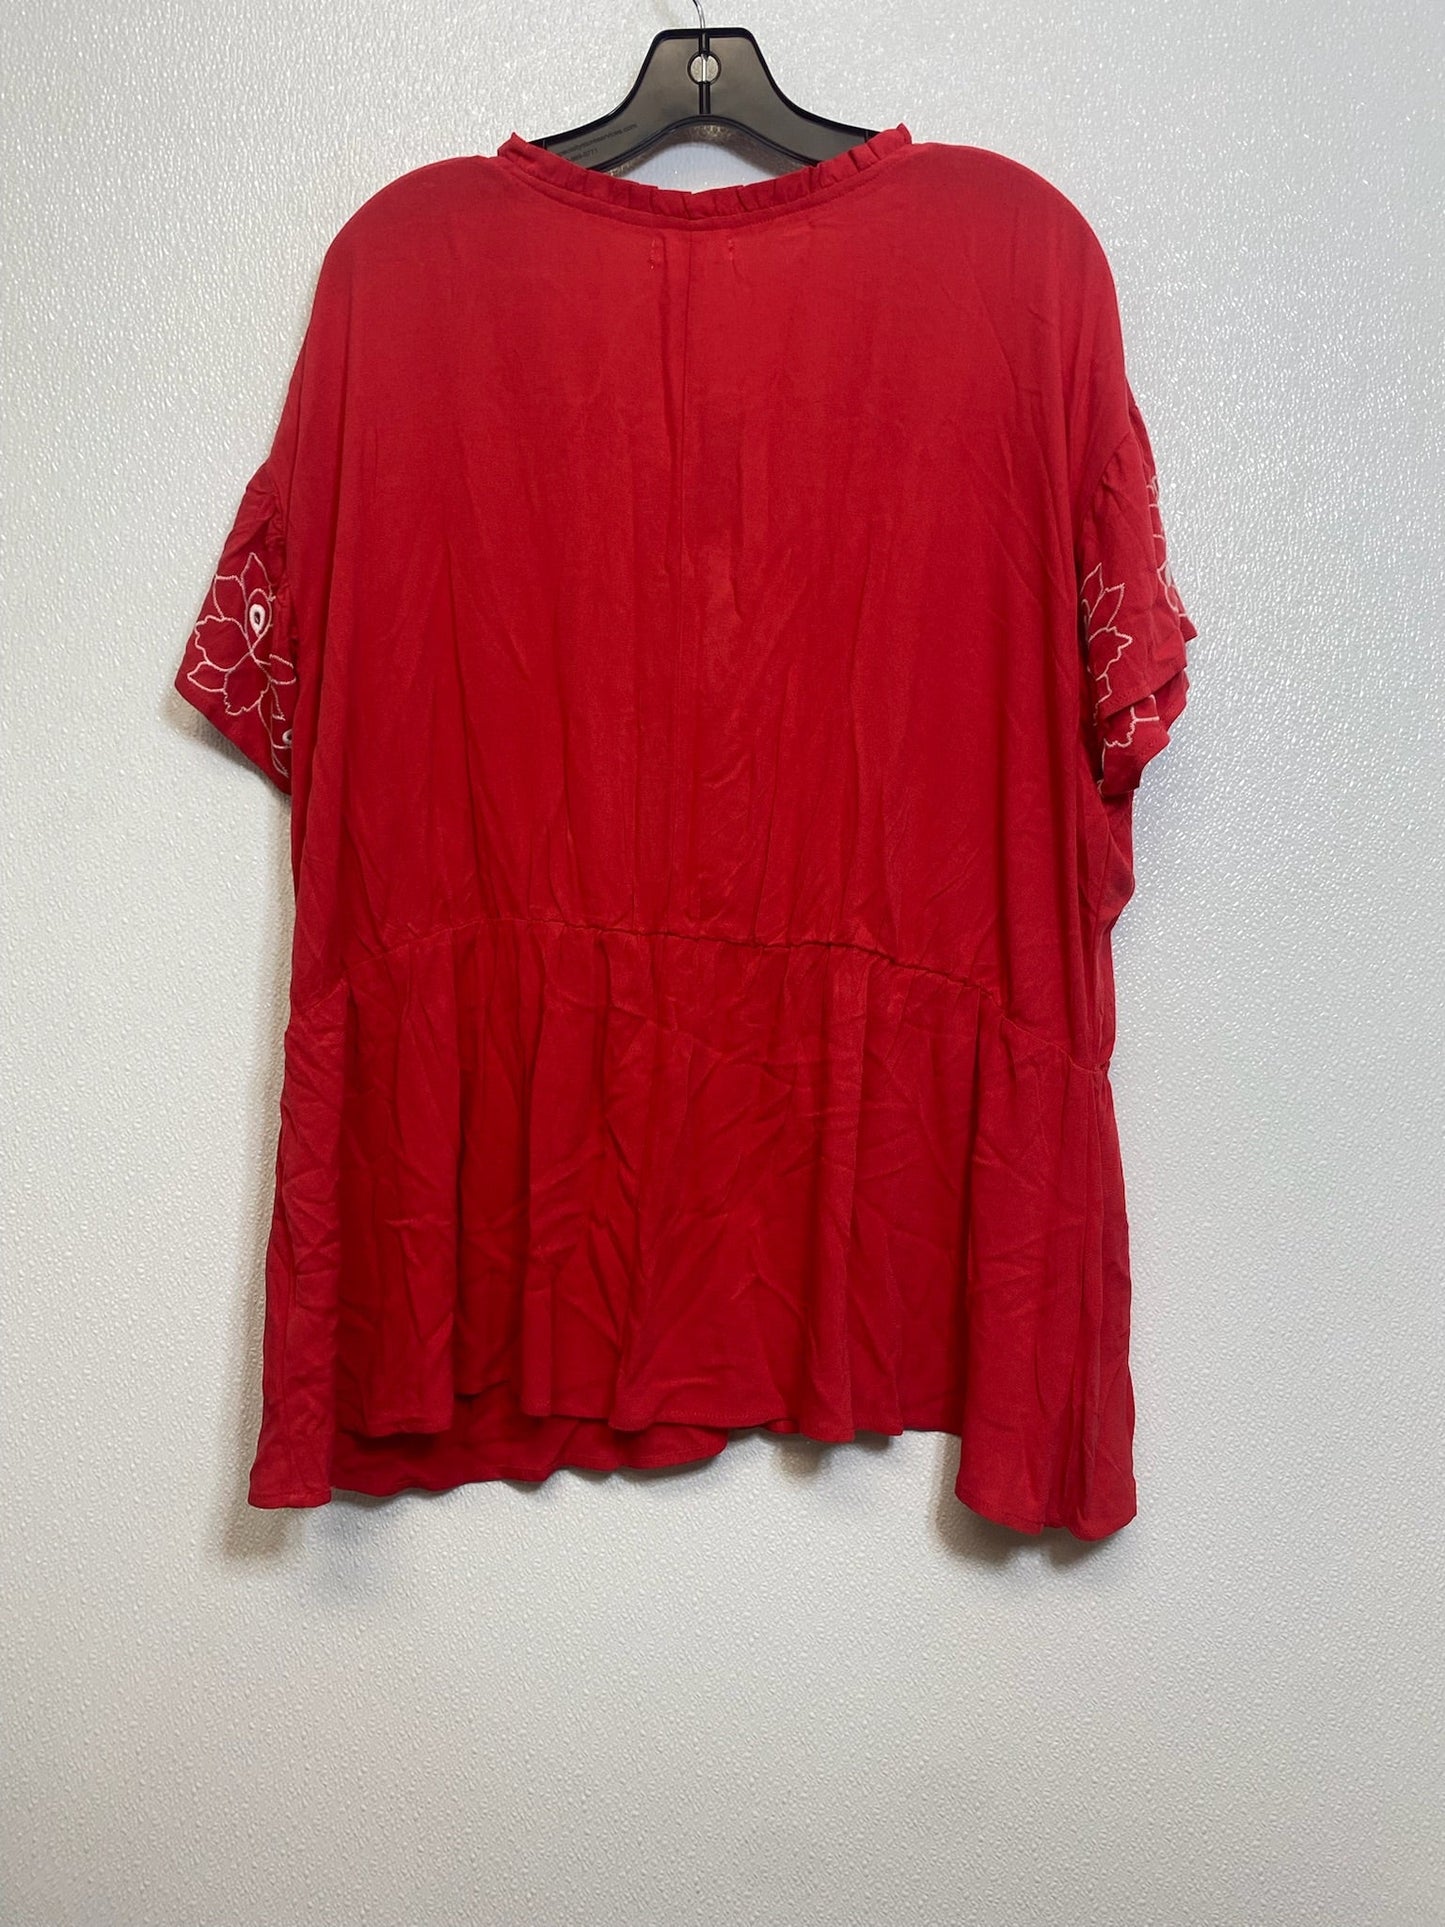 Red Top Short Sleeve Maurices, Size 2x